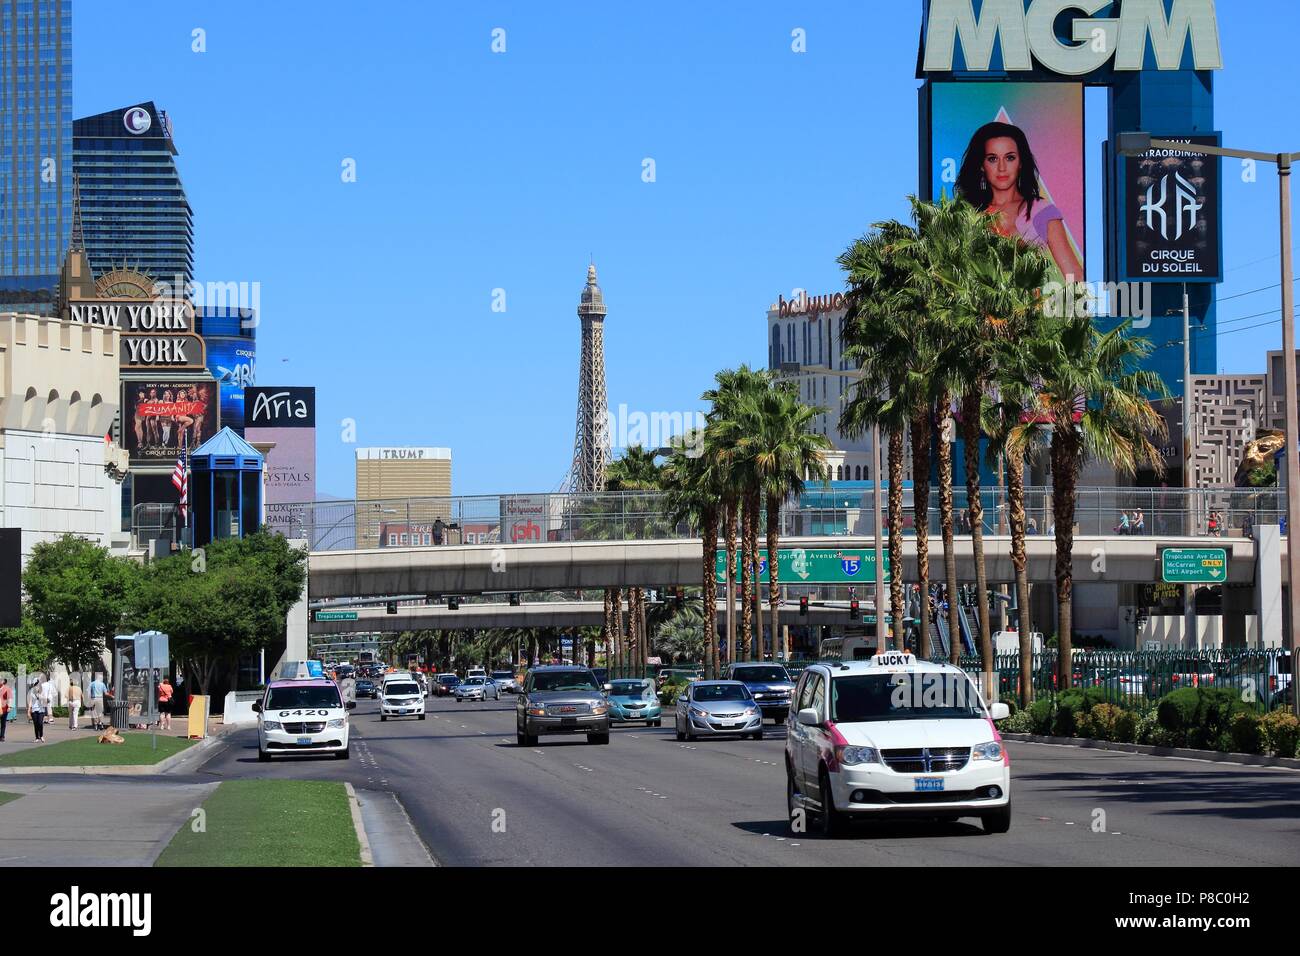 LAS VEGAS, USA - APRIL 14, 2014: Car traffic in Las Vegas, Nevada. Nevada has one of lowest car ownership rates in the USA (500 vehicles per 1000 peop Stock Photo